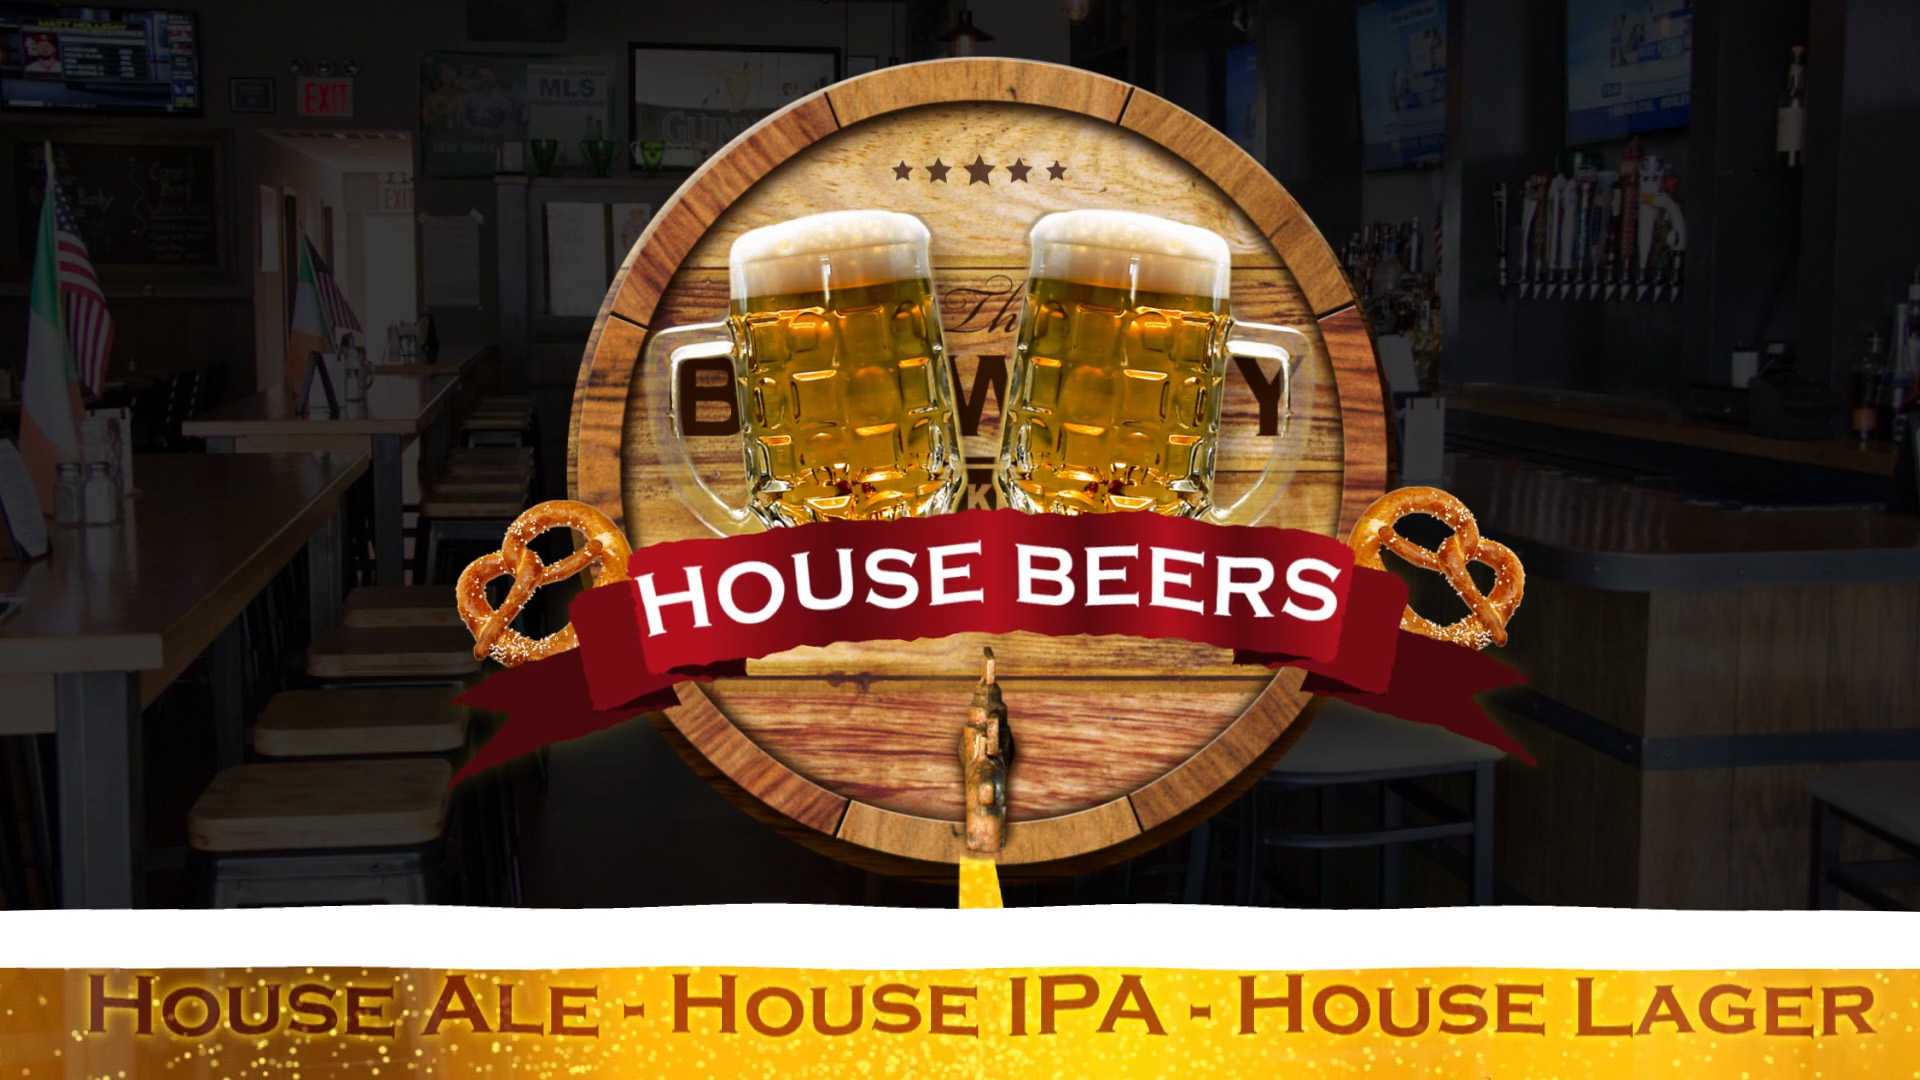 The Brewery – House Beers ad